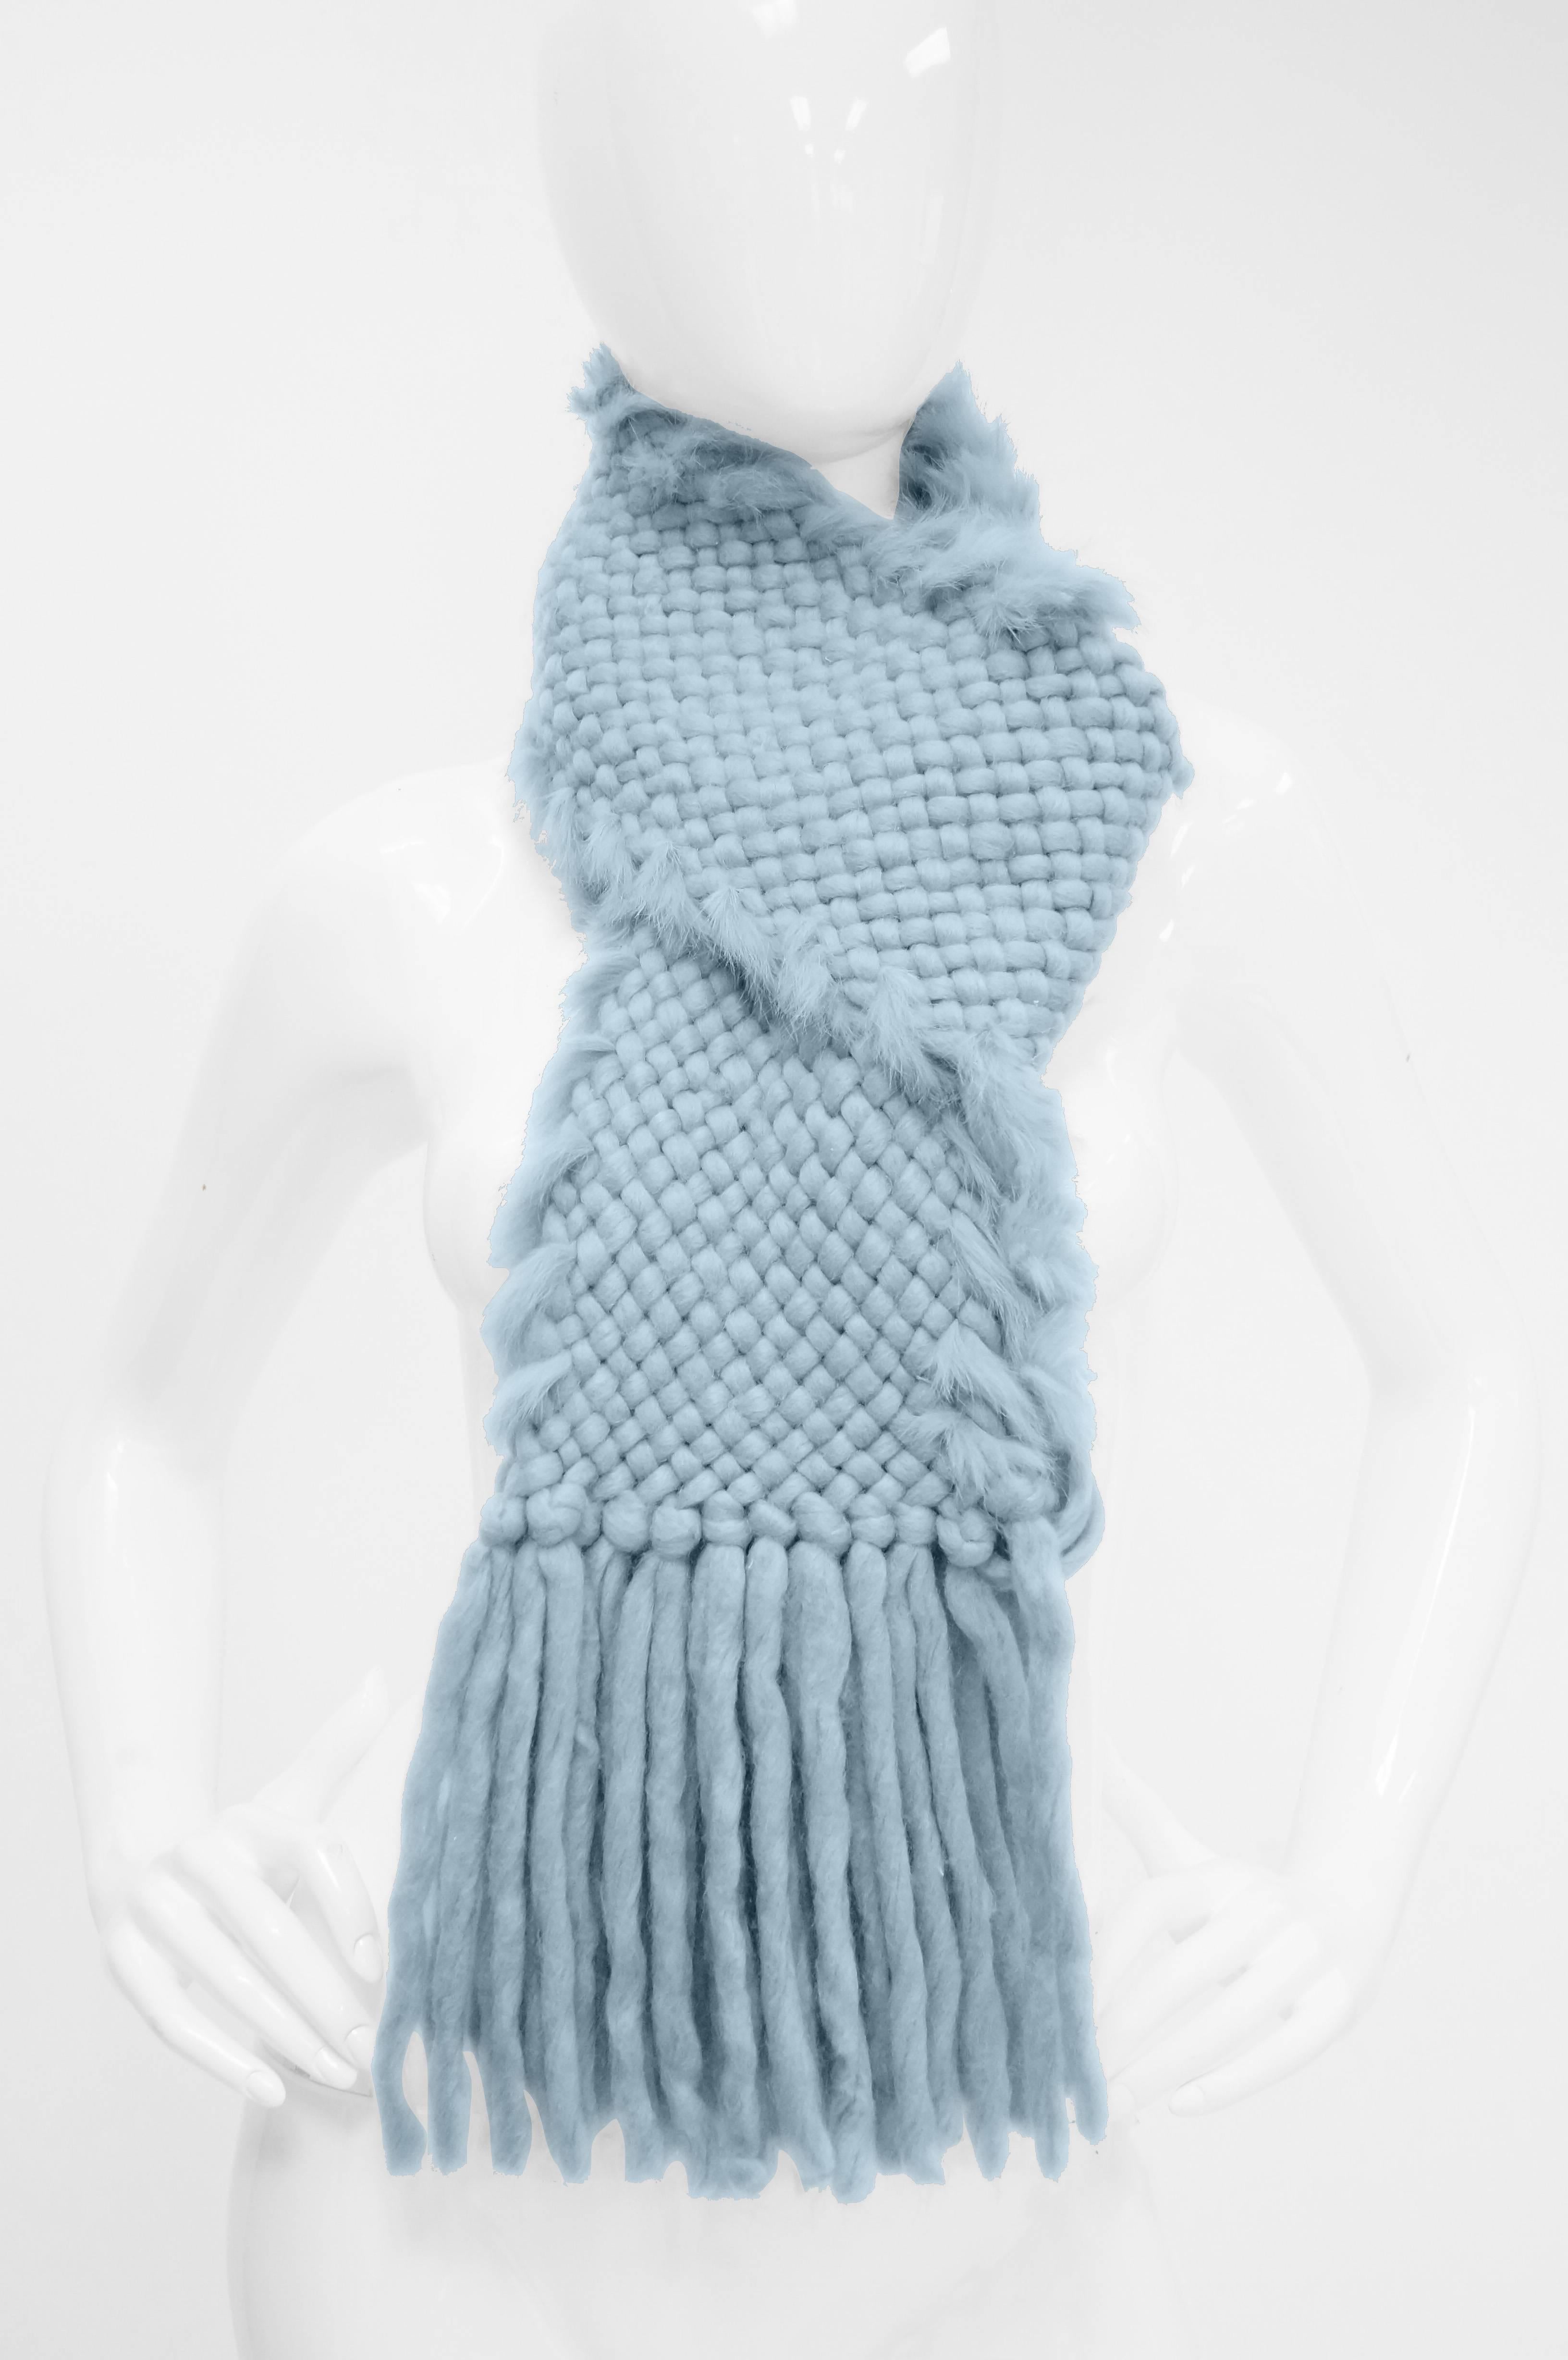 Fabulous soft basket woven angora wool blend scarf with fur trim. The long scarf has fringe at the end, and features fur strips trimming the longer edges of the scarf in a spiral - like design. Let this sky blue scarf cheer you up during the gray